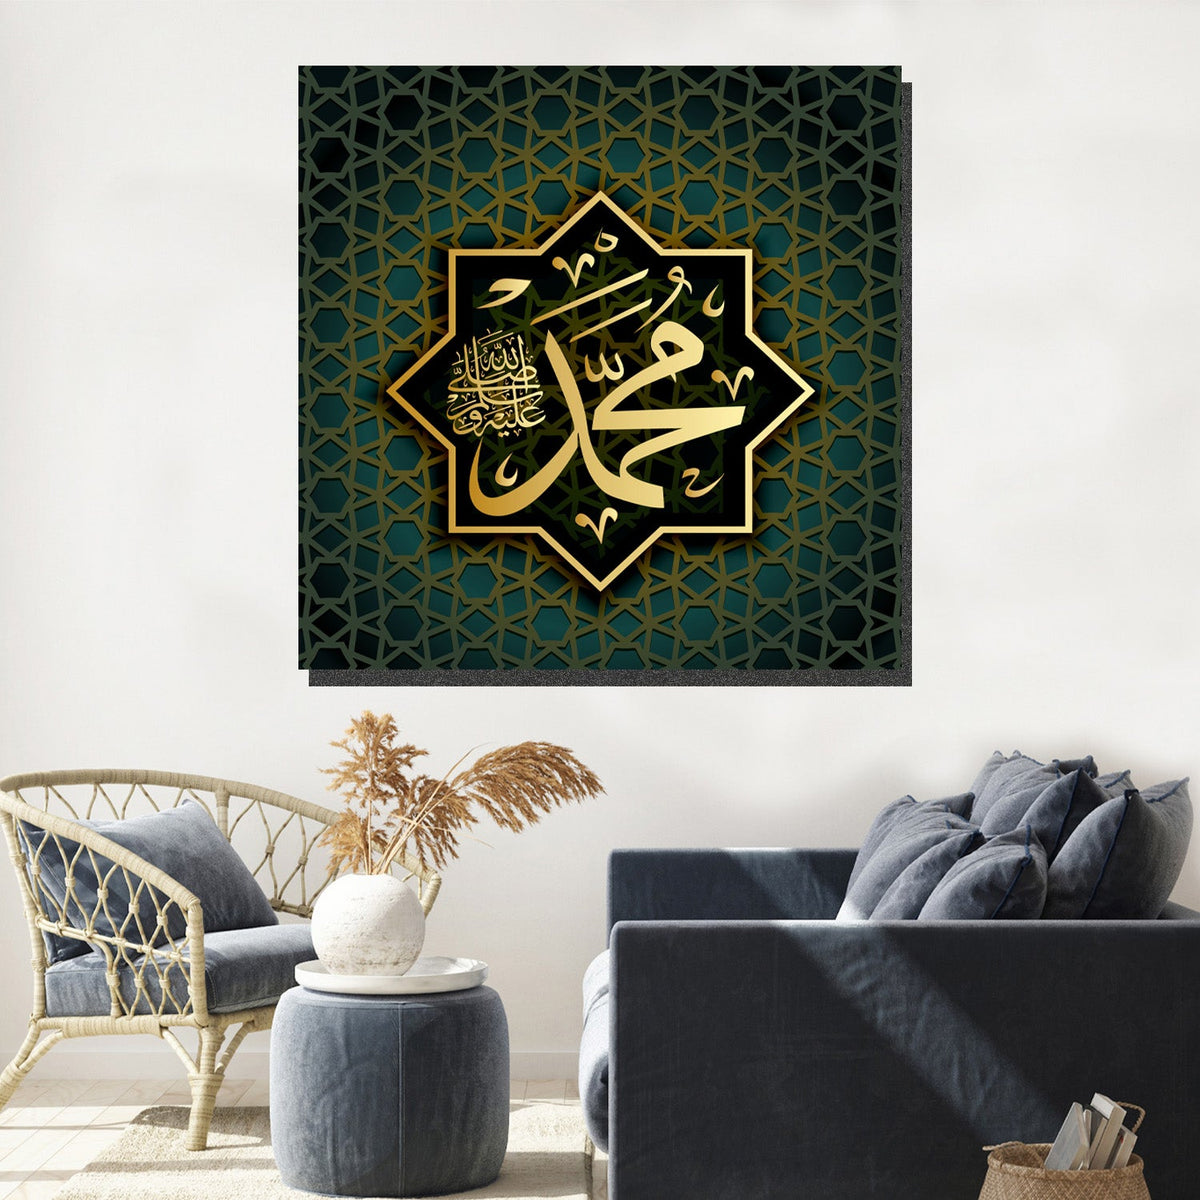 https://cdn.shopify.com/s/files/1/0387/9986/8044/products/IslamicLimitedEdition14CanvasArtprintStretched-3.jpg